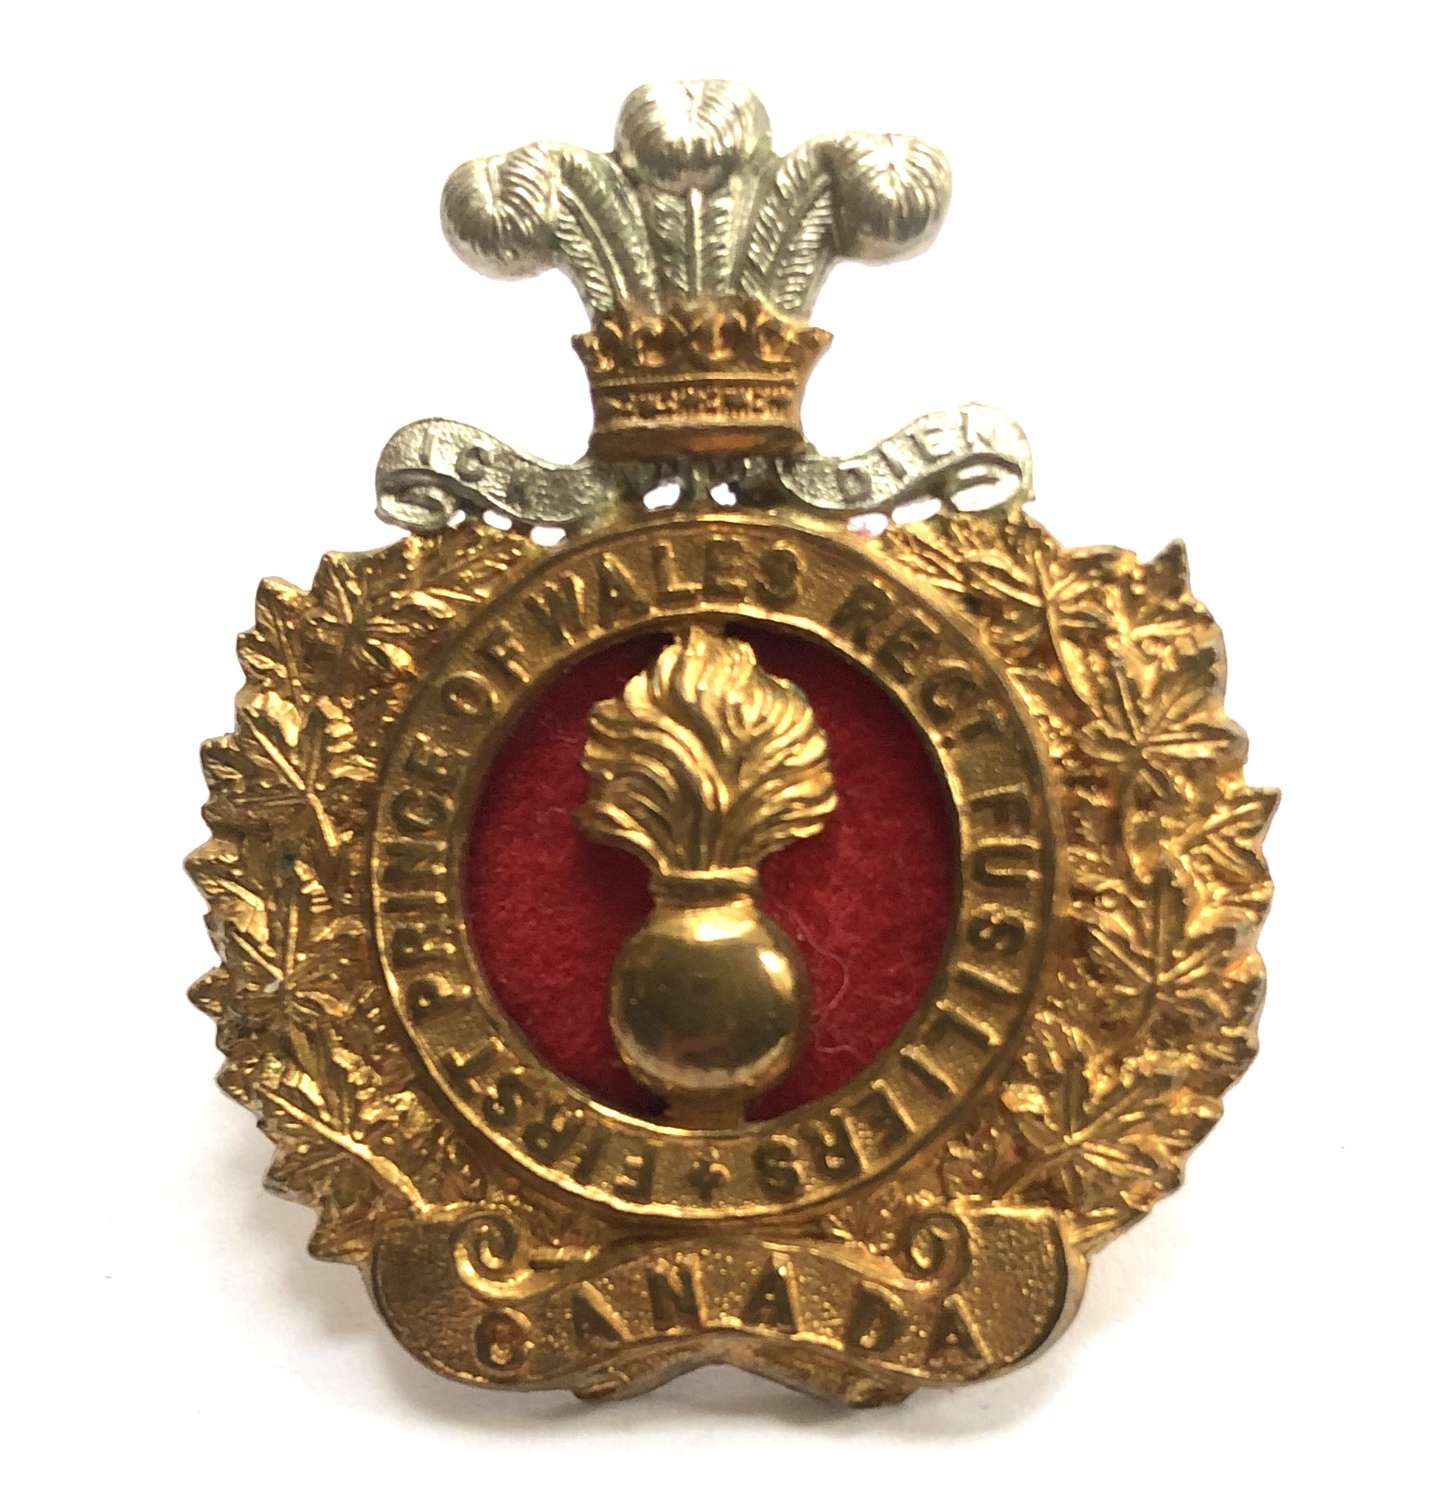 Canada. 1st Prince of Wales Regiment of Fusiliers cap badge 1901-11